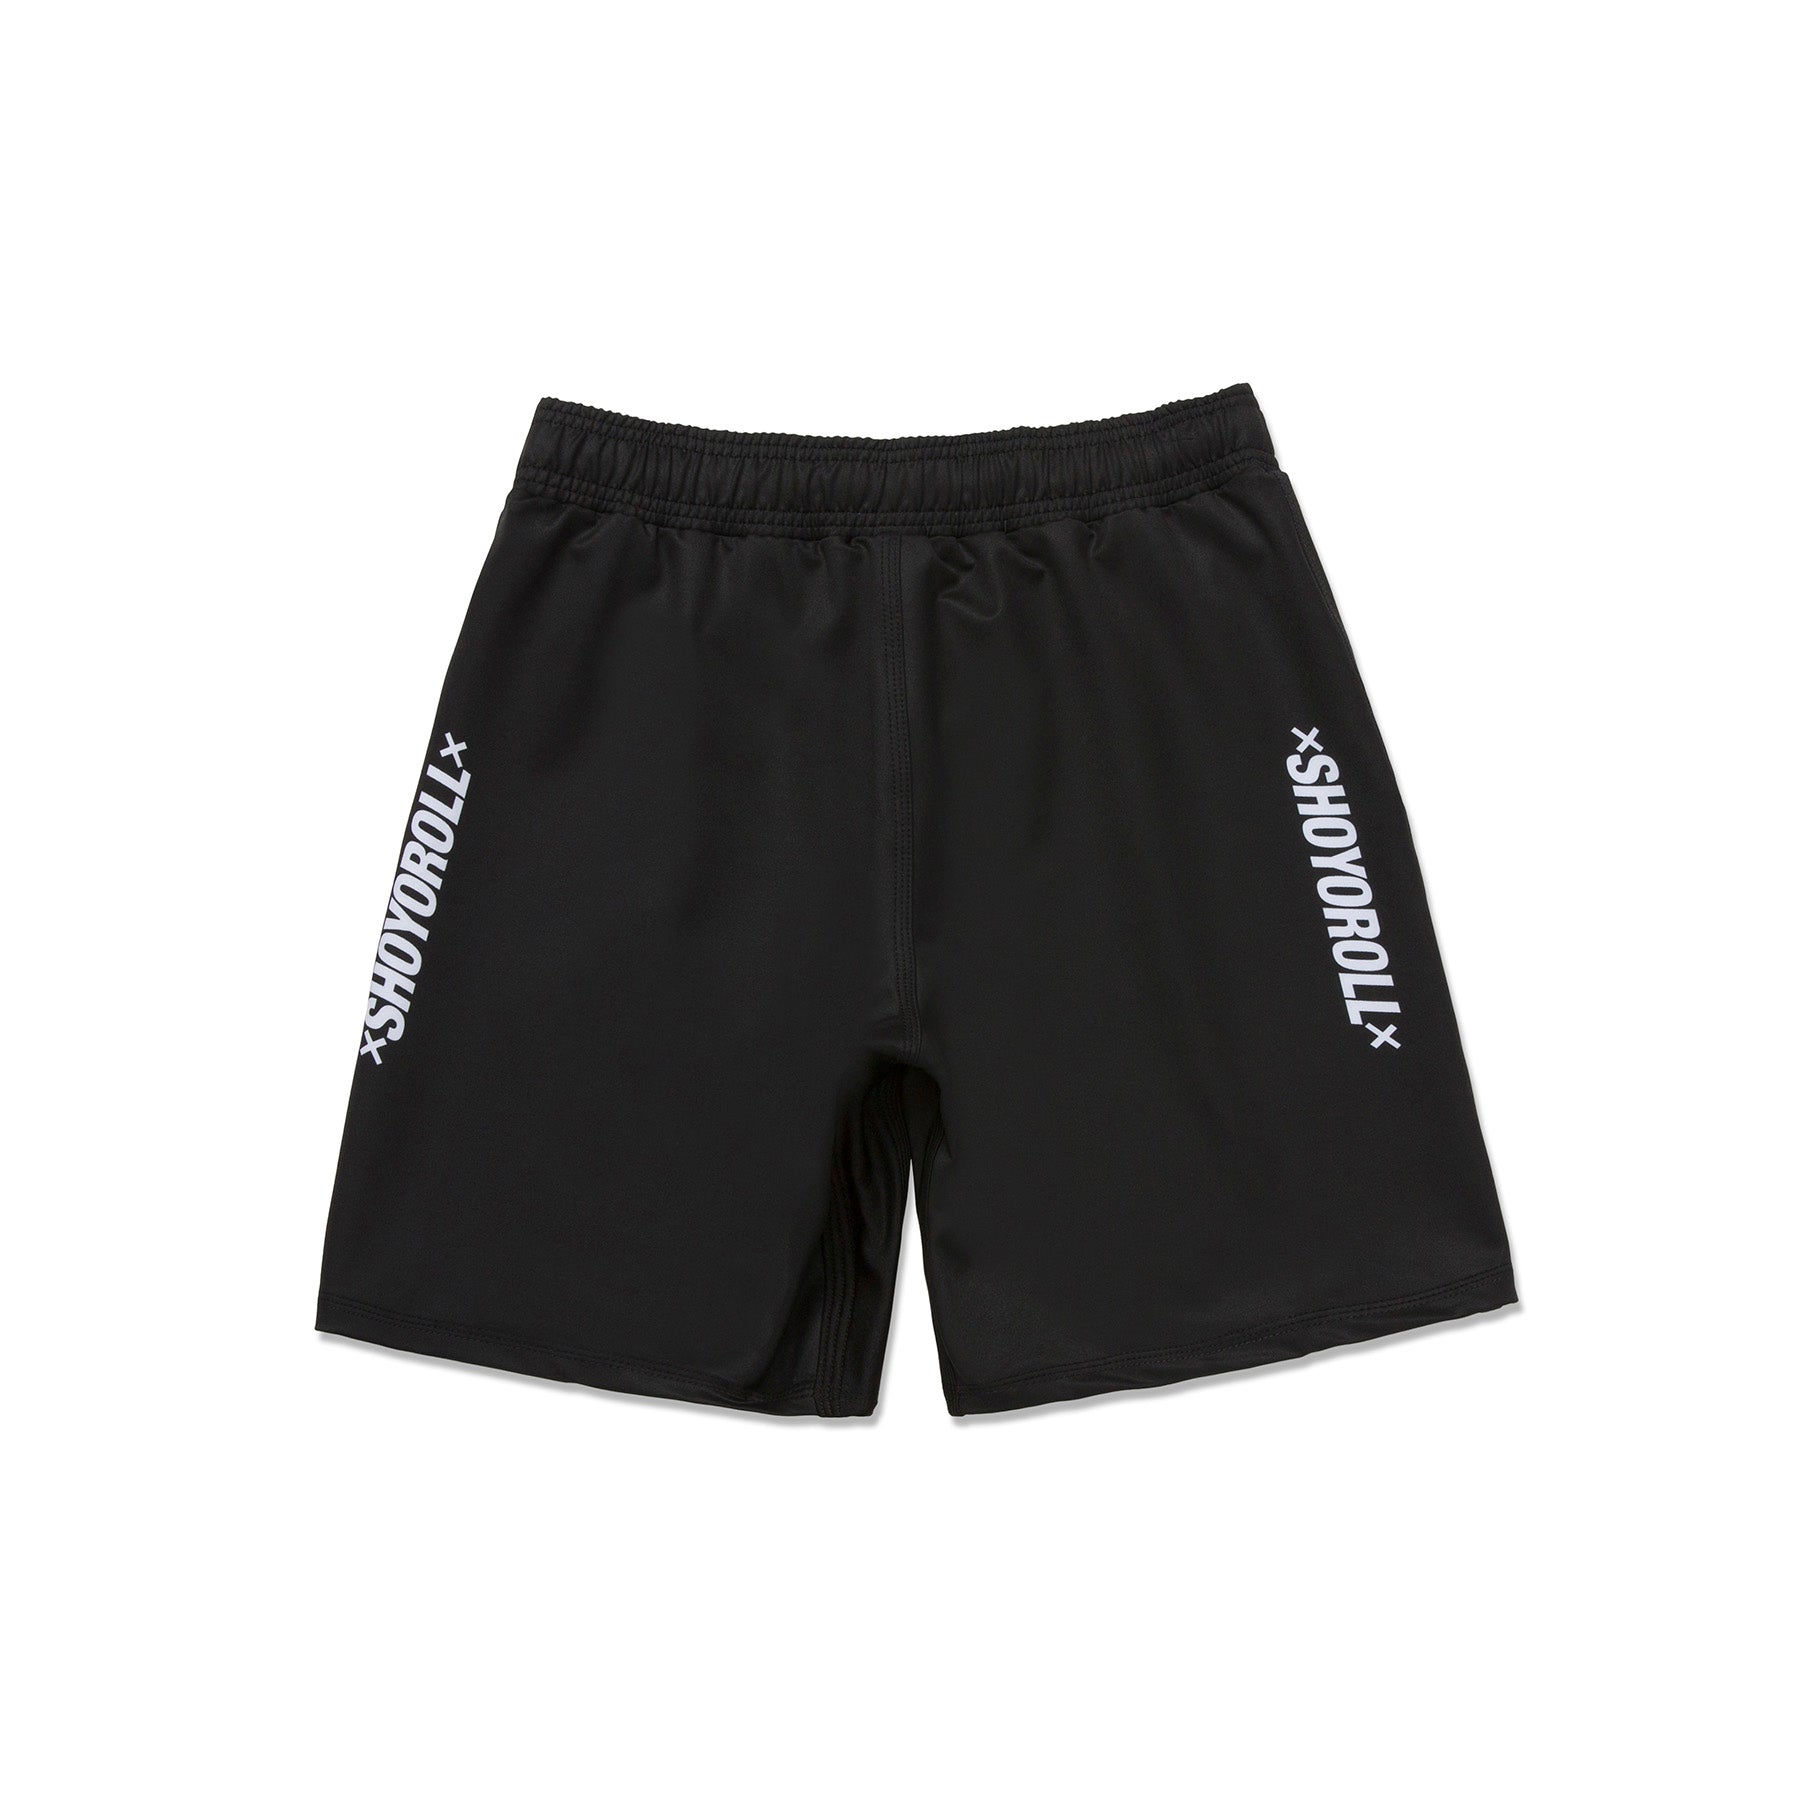 RLS 23 Training Fitted Shorts